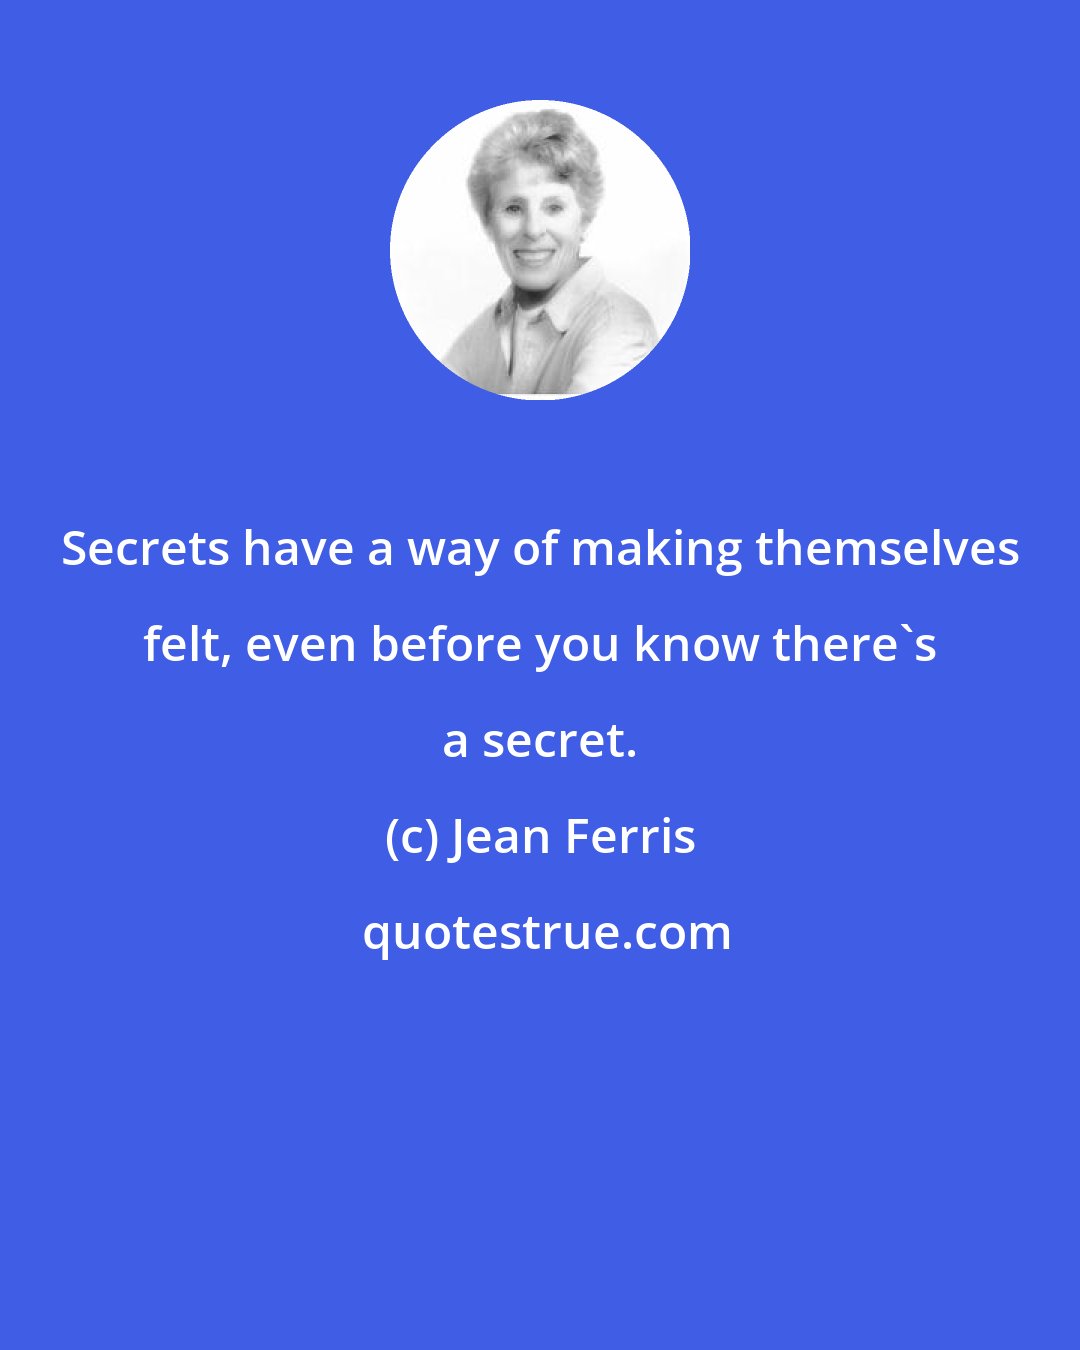 Jean Ferris: Secrets have a way of making themselves felt, even before you know there's a secret.